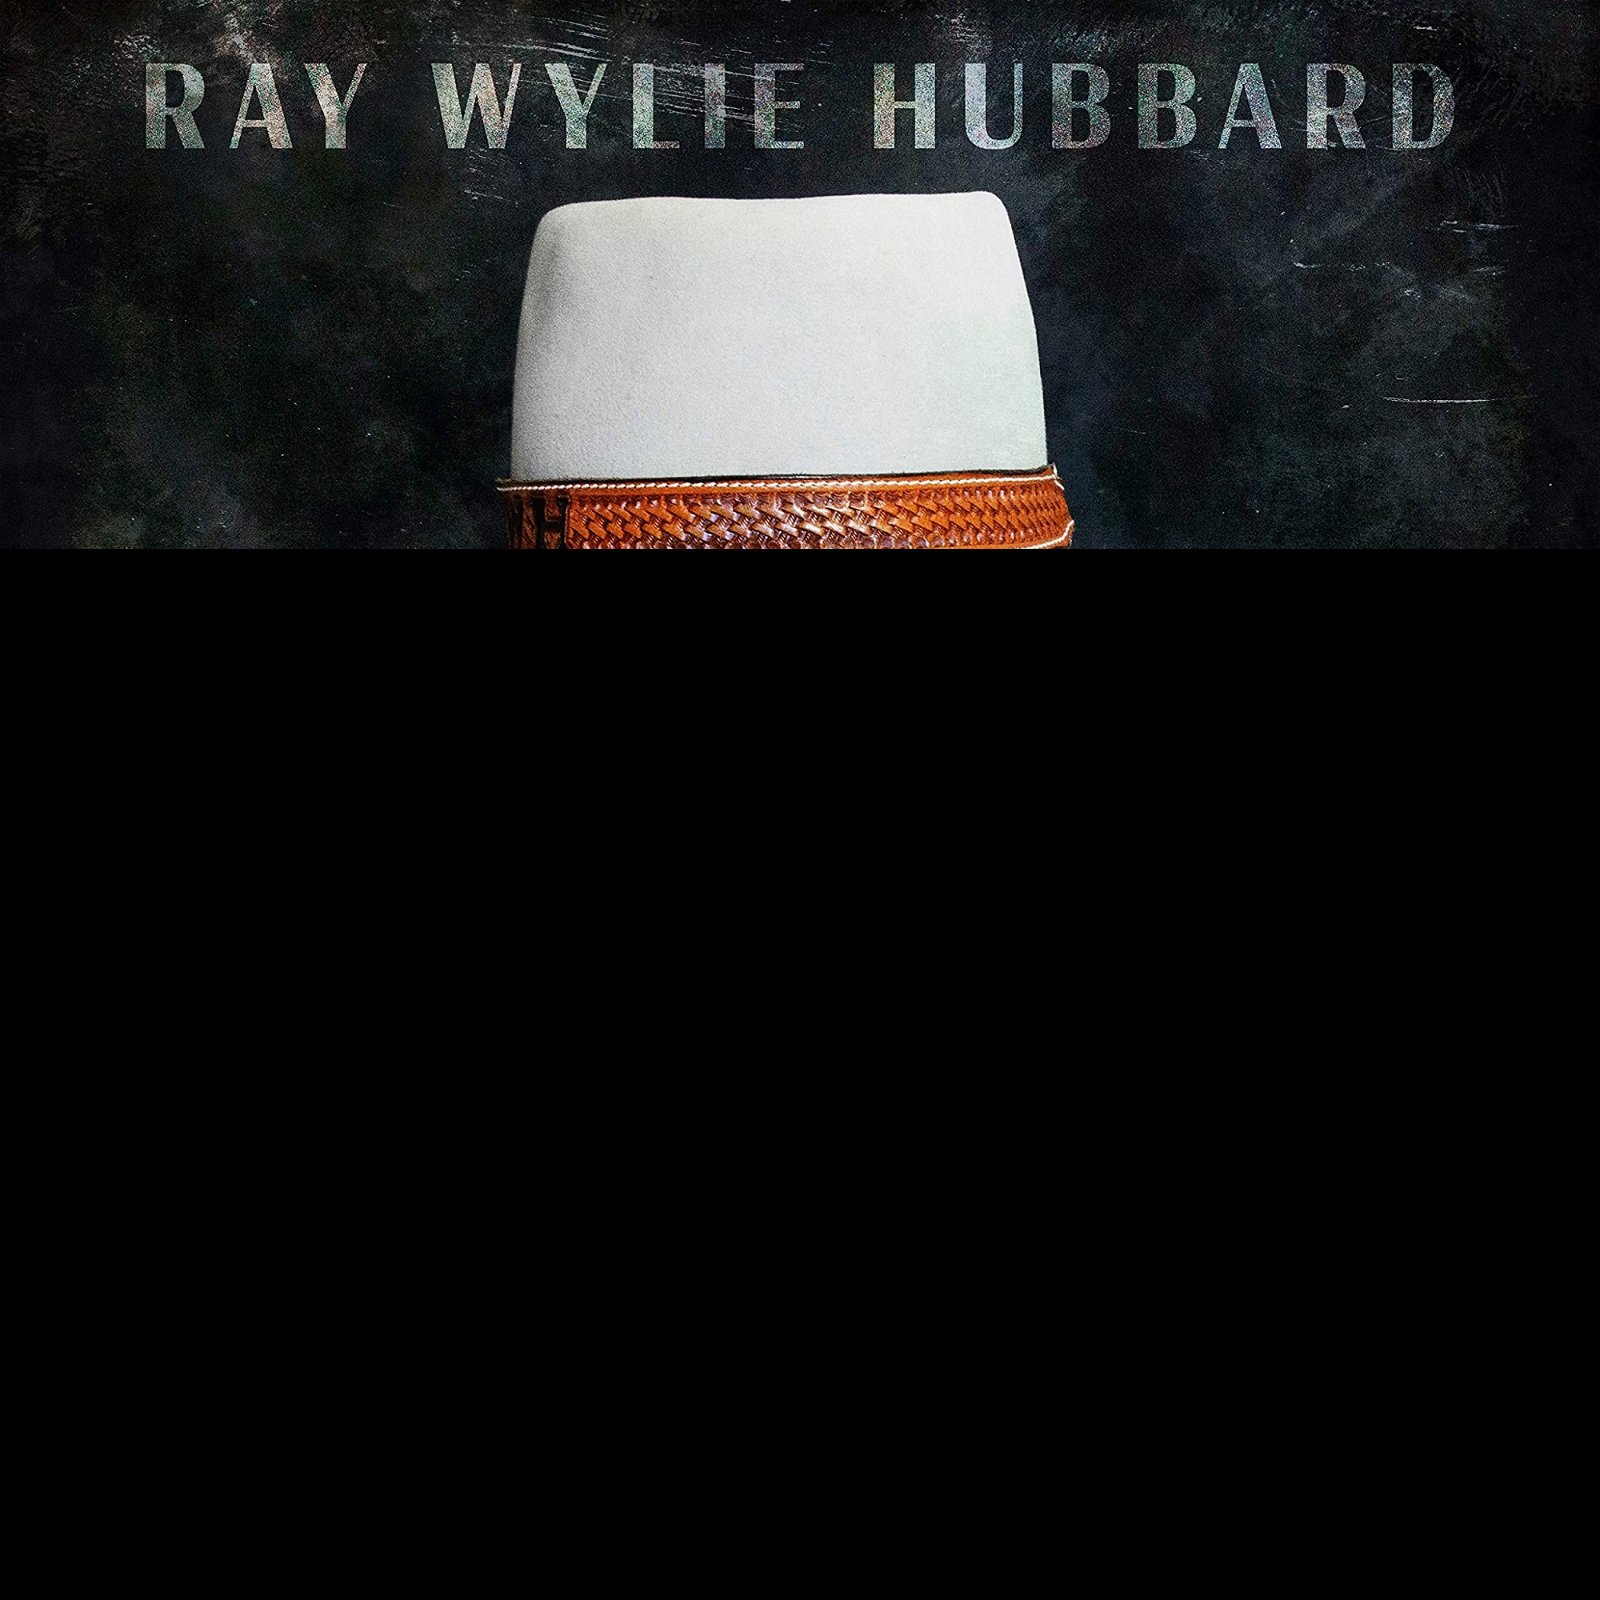 CD Shop - HUBBARD, RAY WYLIE CO-STARRING